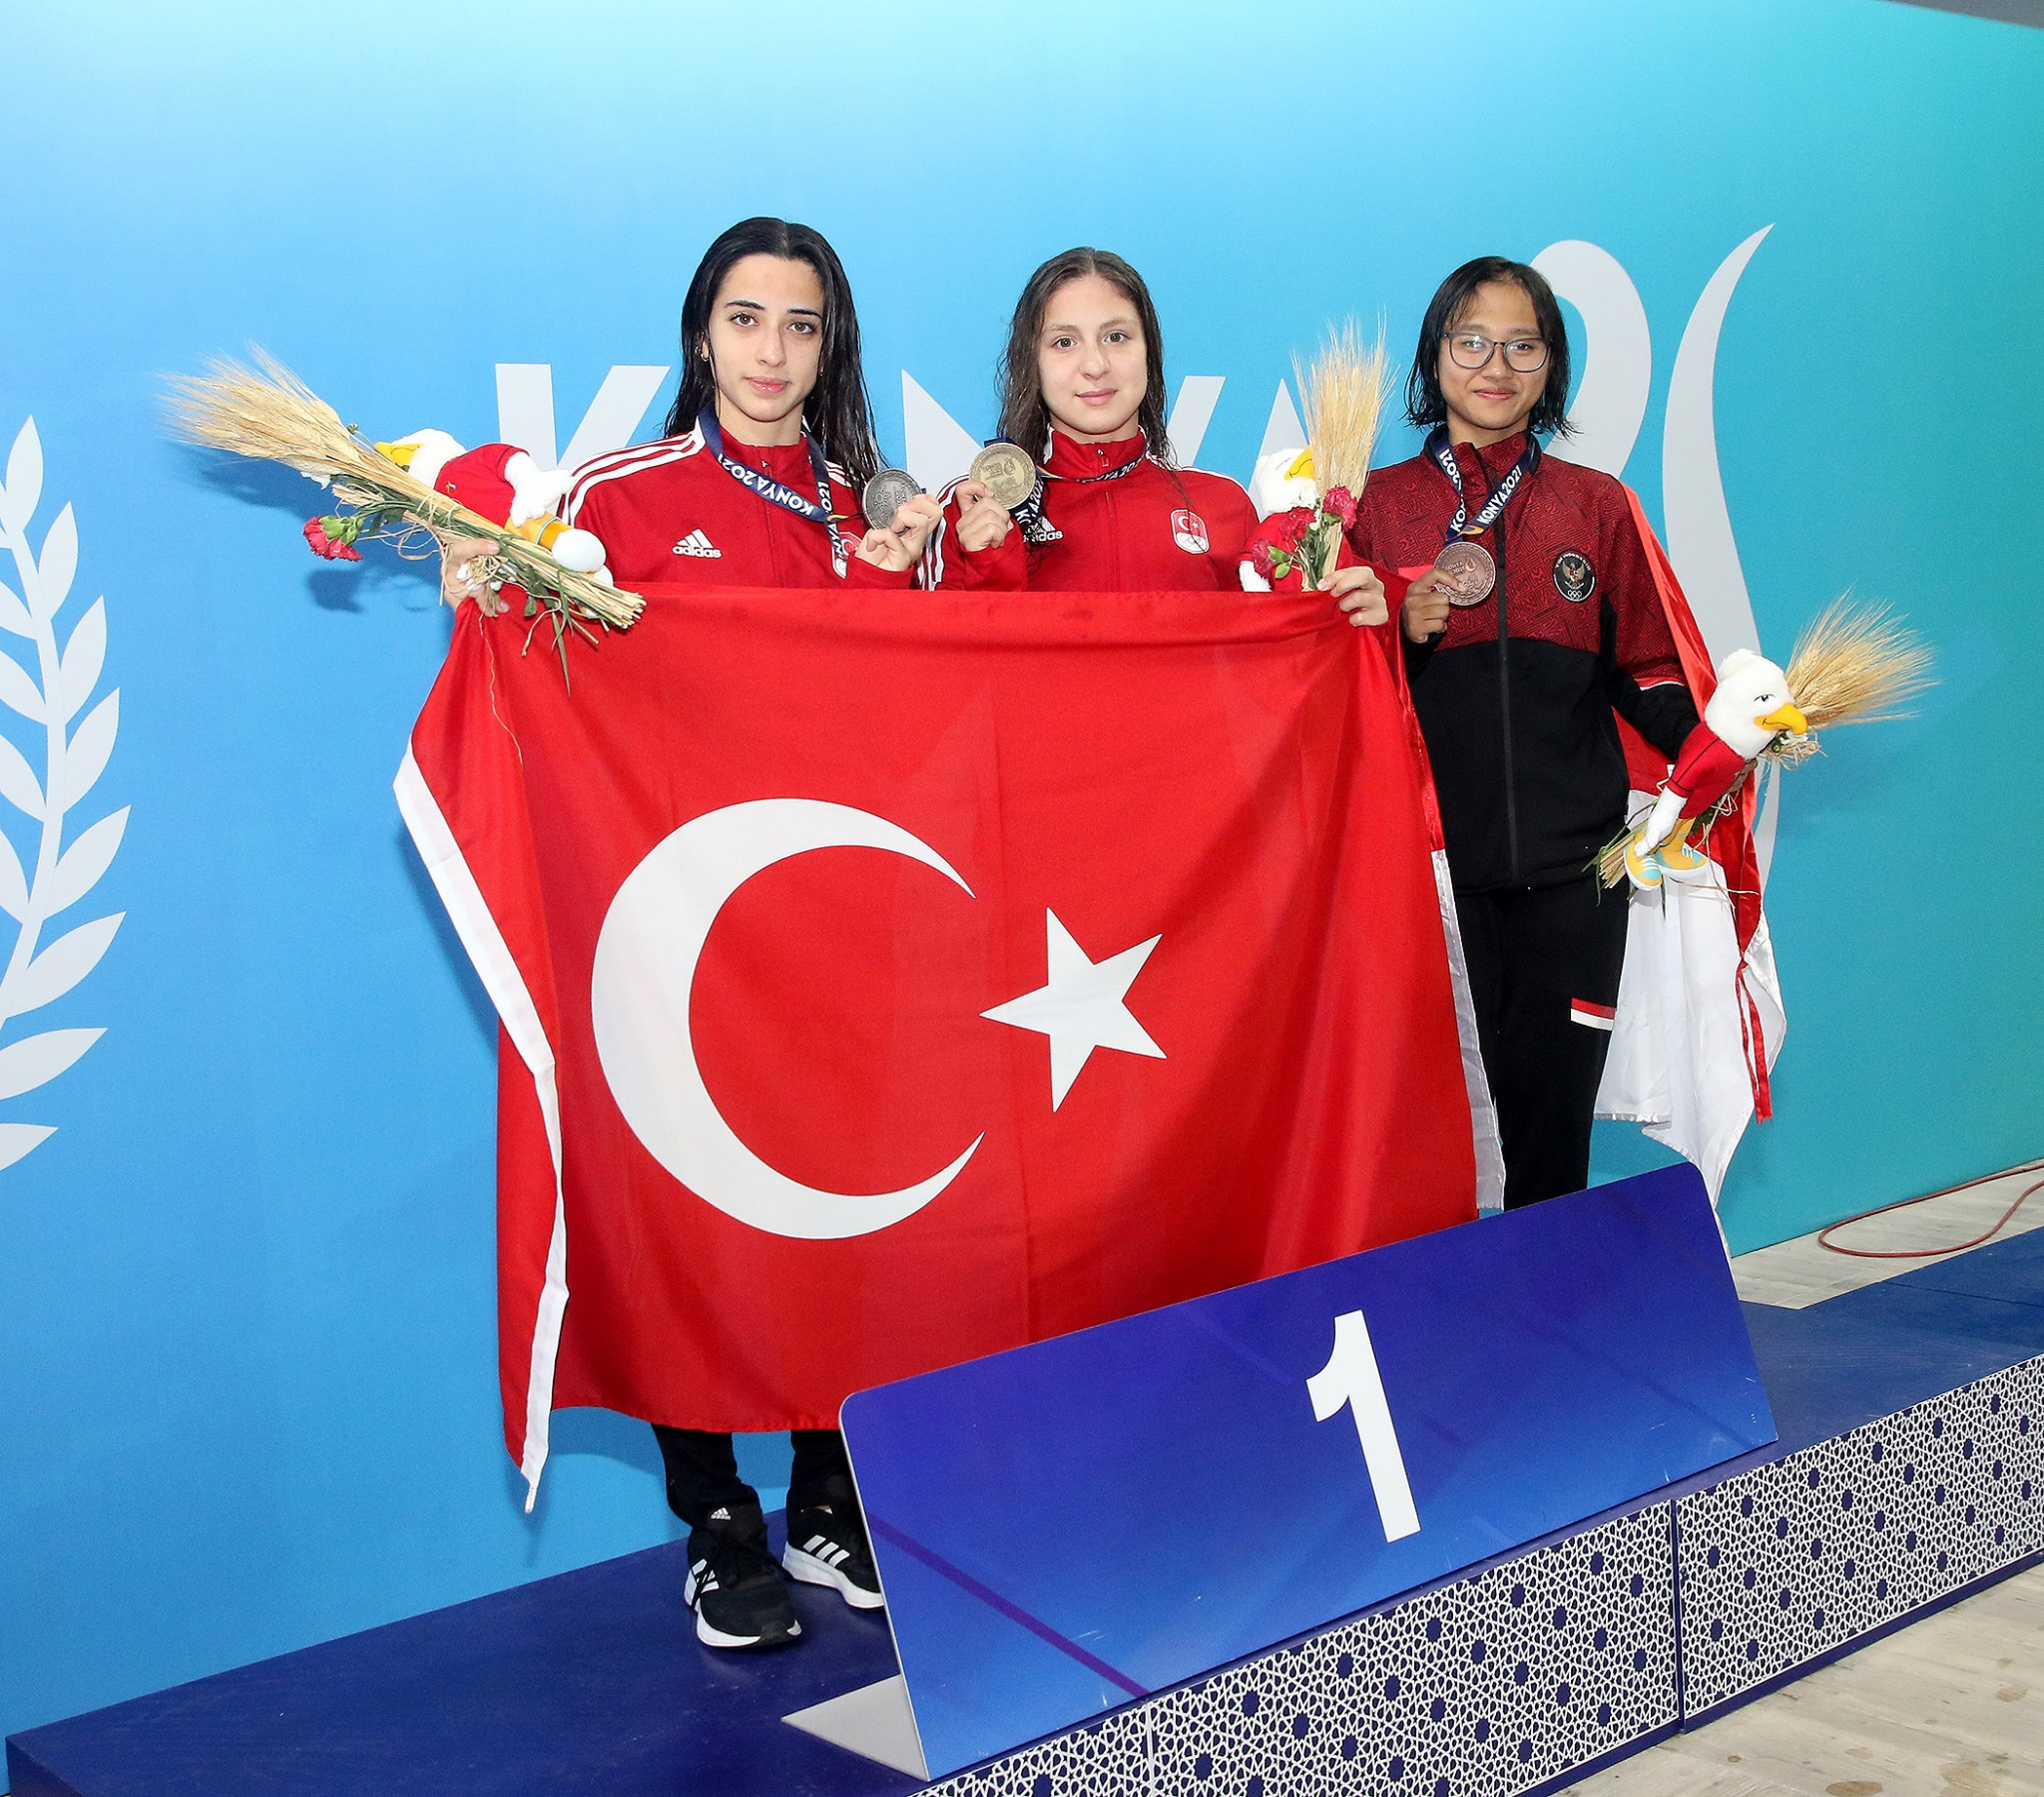 Turkey claimed seven more golds in the swimming pool as Merve Tuncel, centre, broze the Games record to win the women's 1500m freestyle title  ©Konya 2021